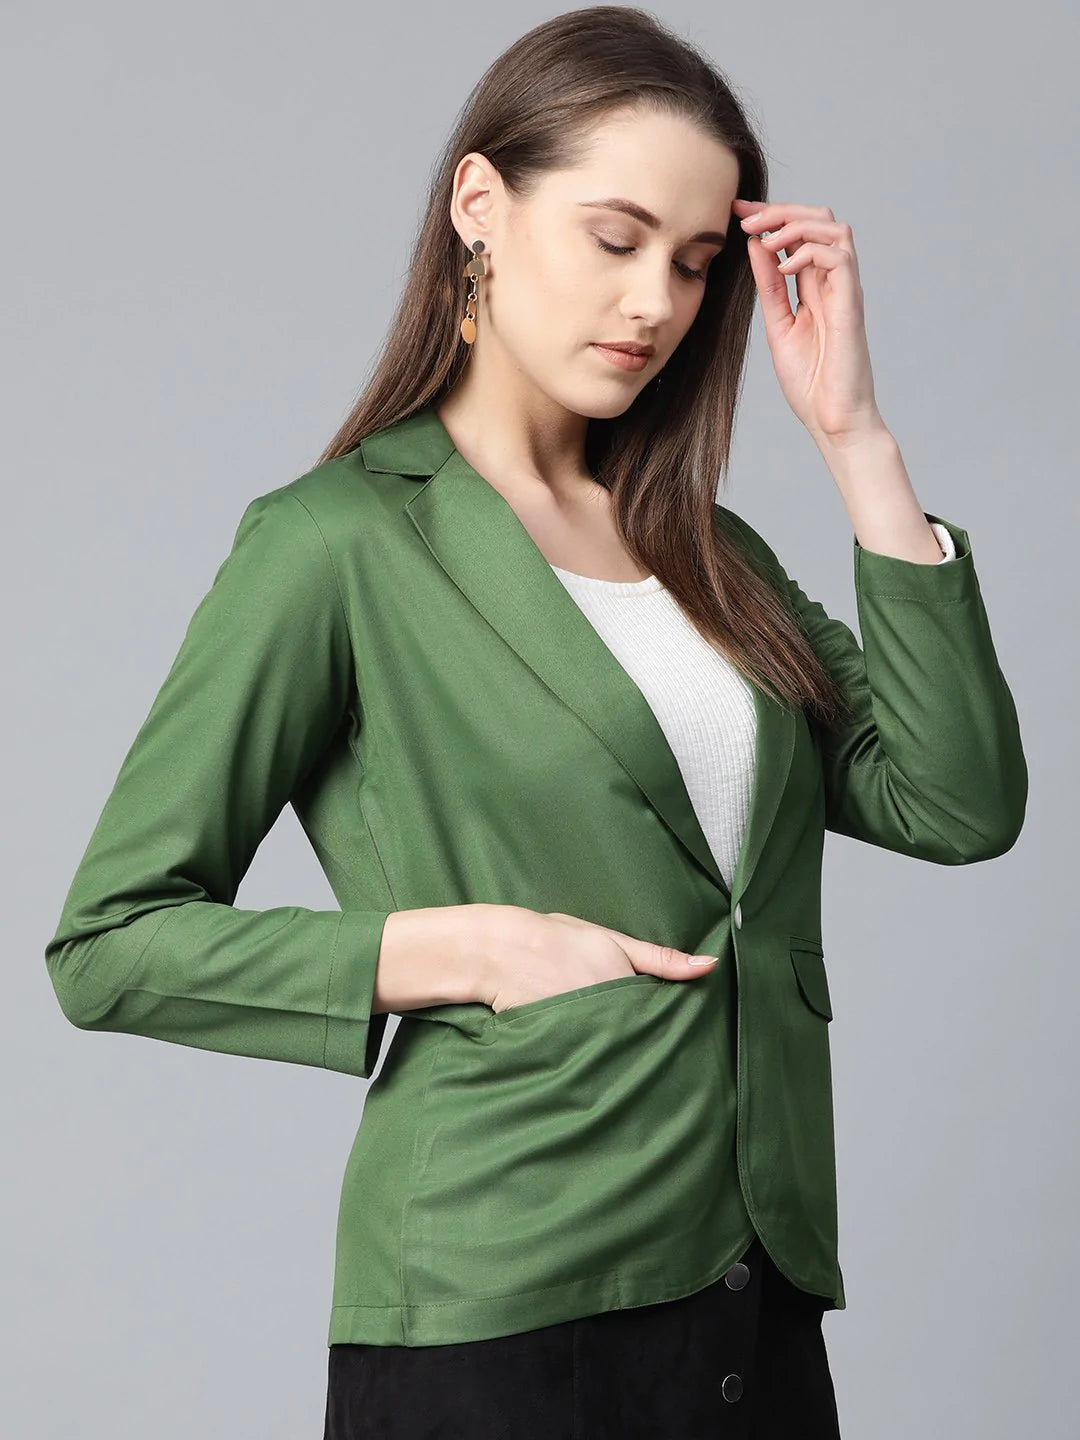 Jompers Women Olive-Green Solid Single-Breasted Smart Casual Blazer ( JOB 6001 Olive )